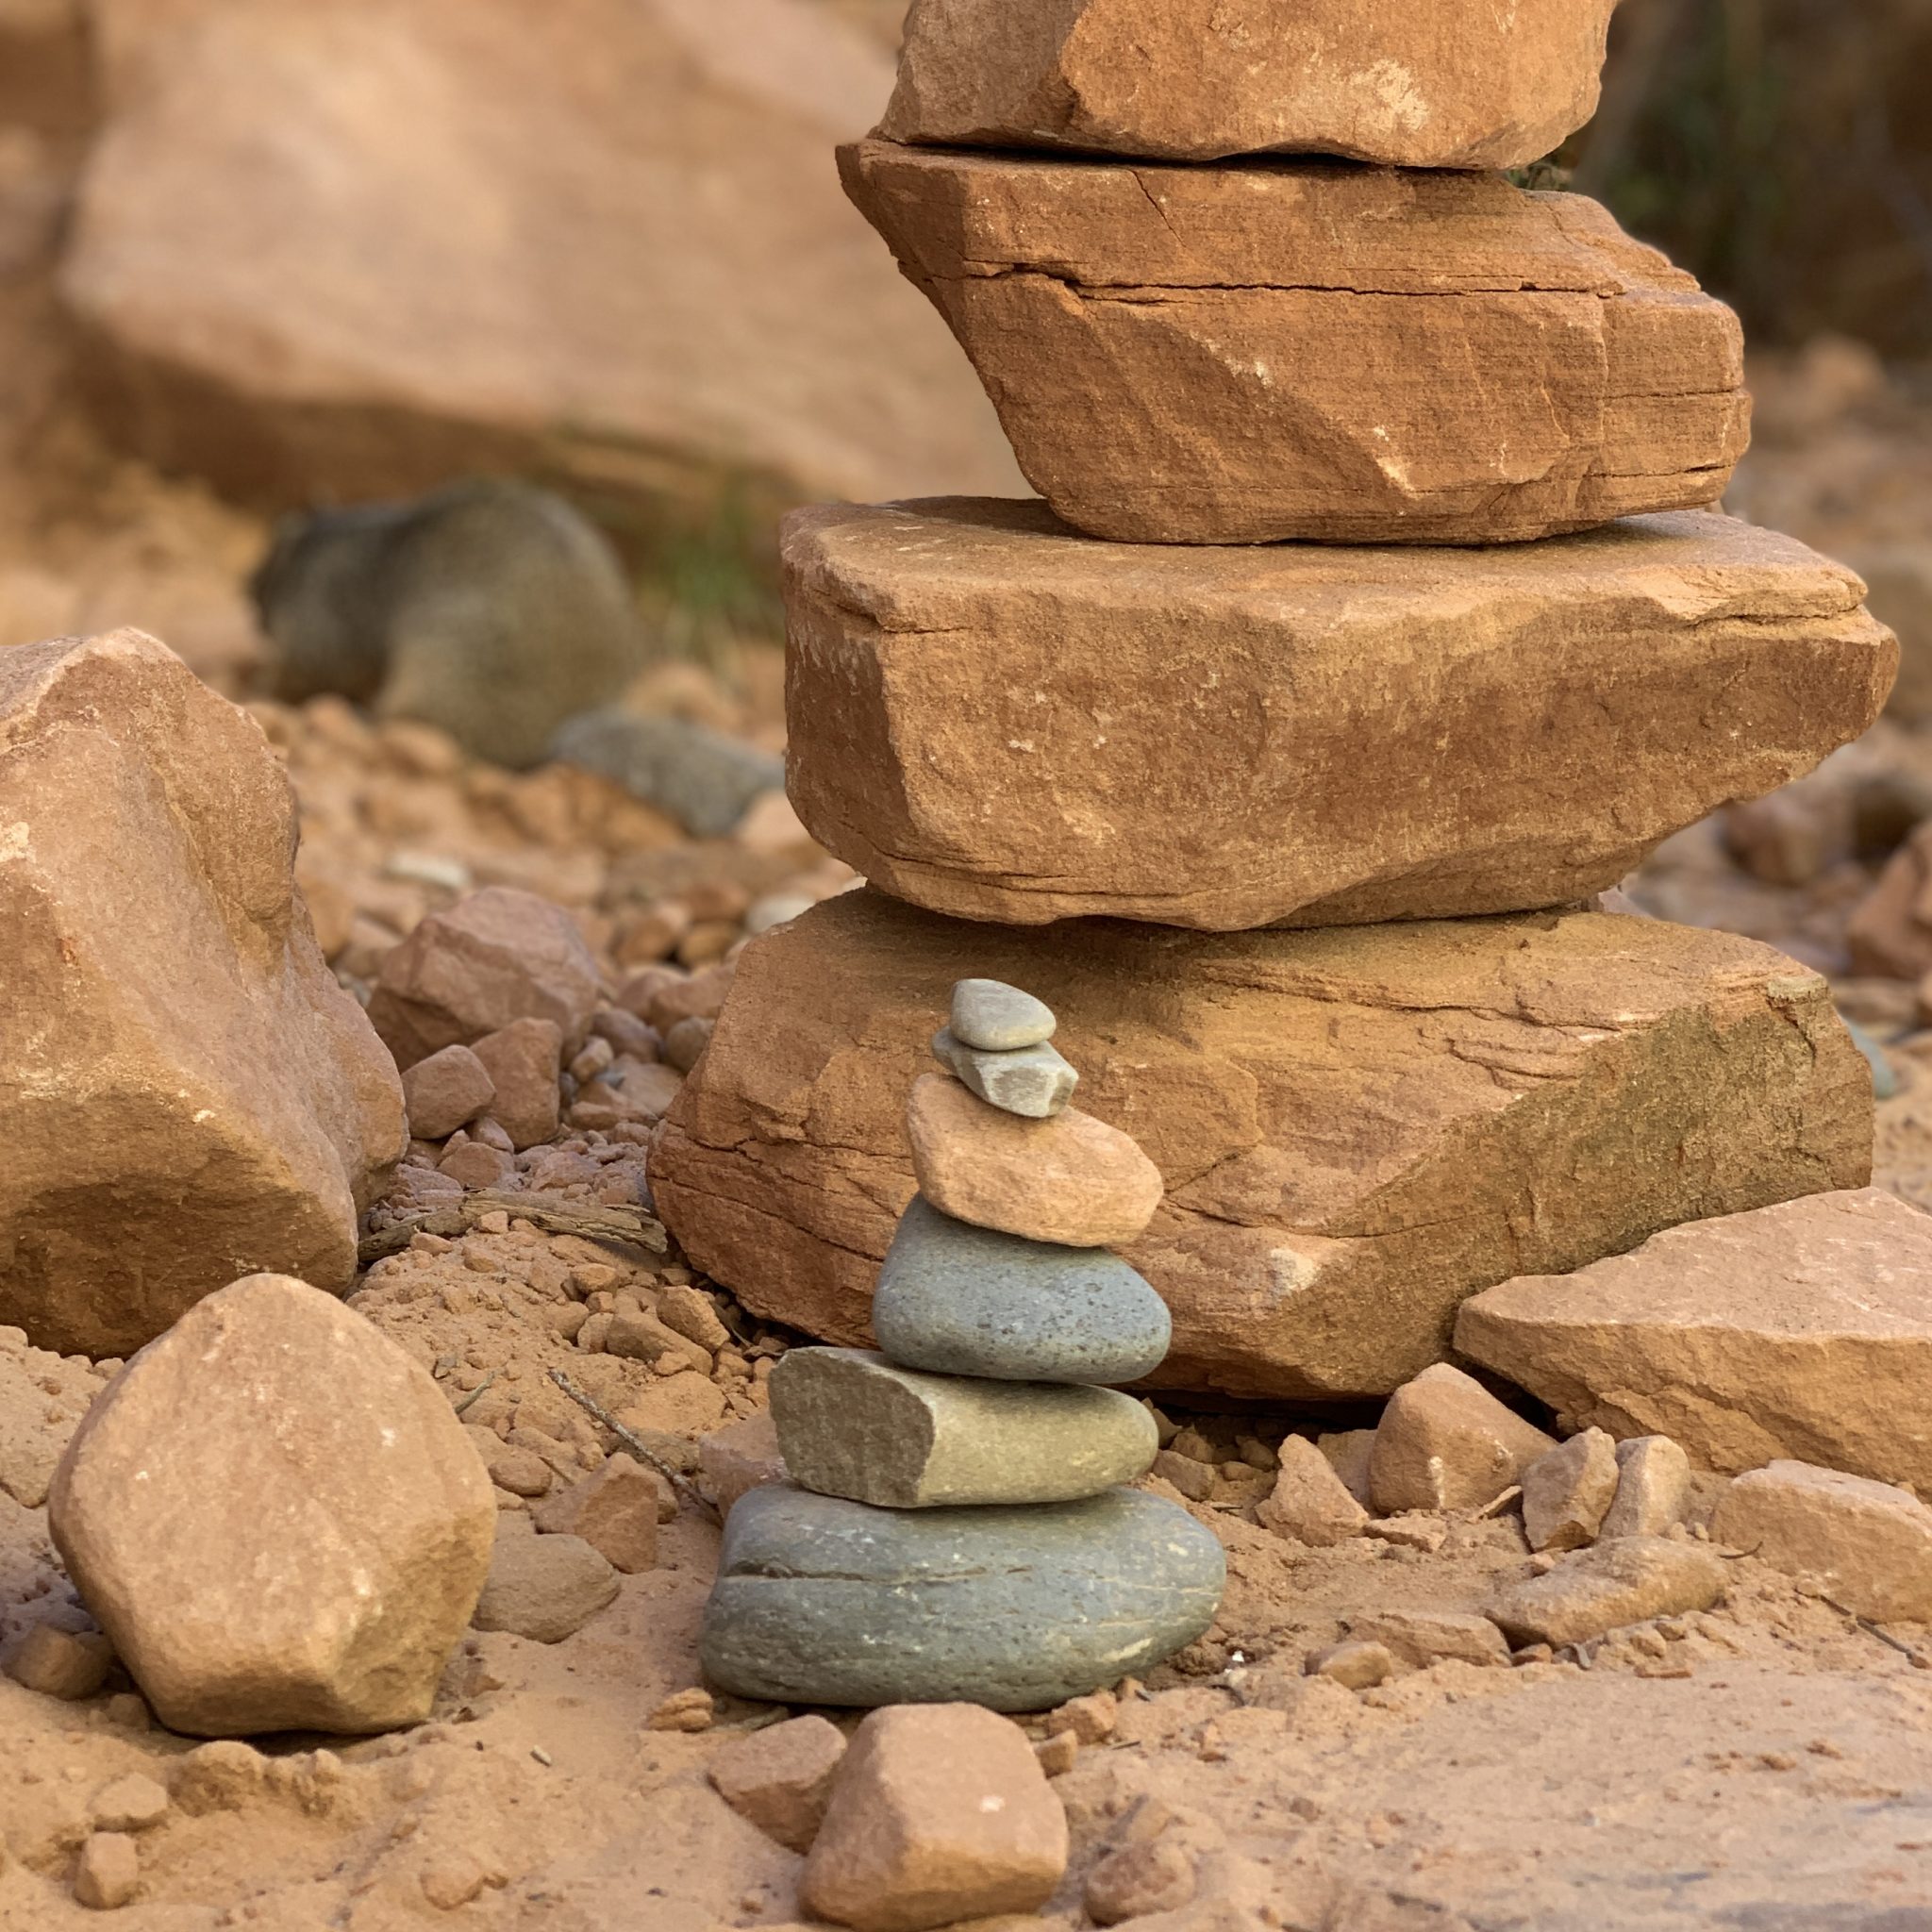 Stacked Rocks In The Dirt